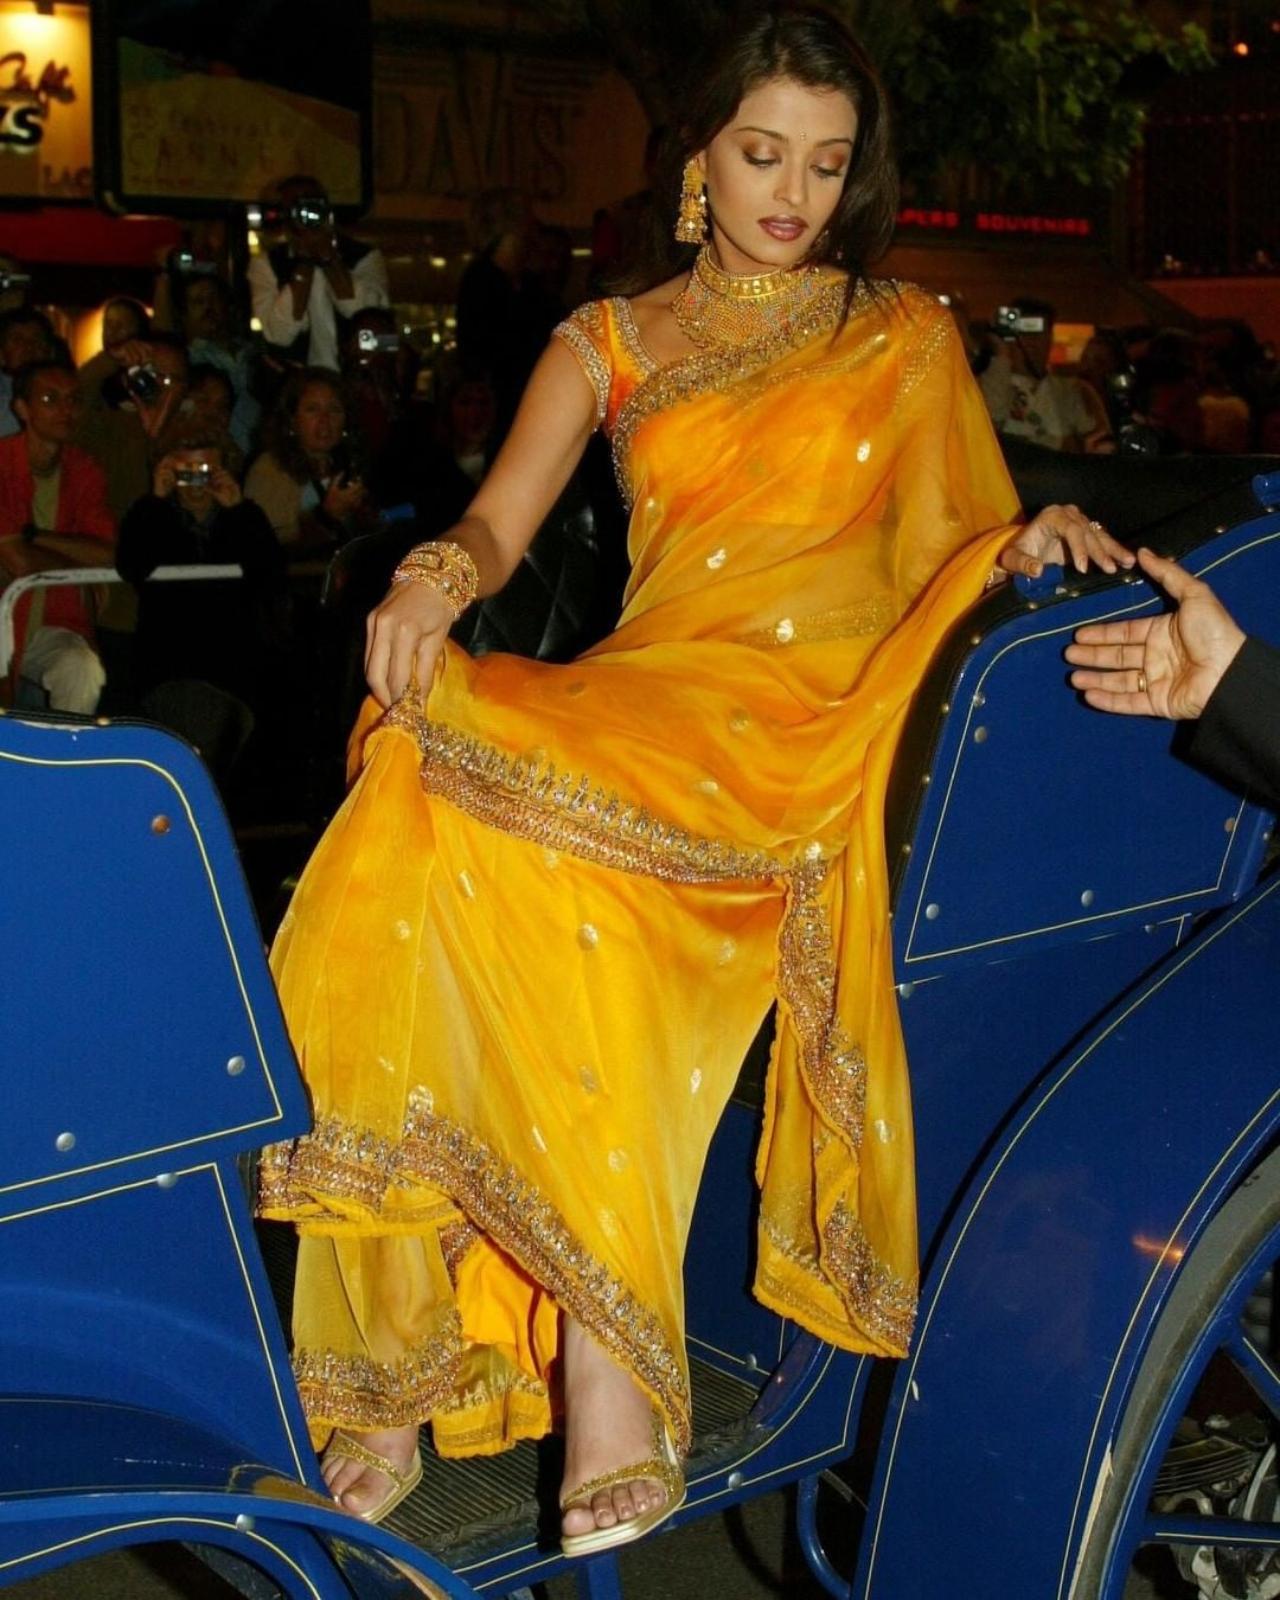 As she made her first appearance at the Cannes Festival in 2002 for the premiere of her film Devdas, this look also became one of my most memorable red carpet looks till date. It was as if Aishwarya Rai Bachchan was dipped in gold, the right way